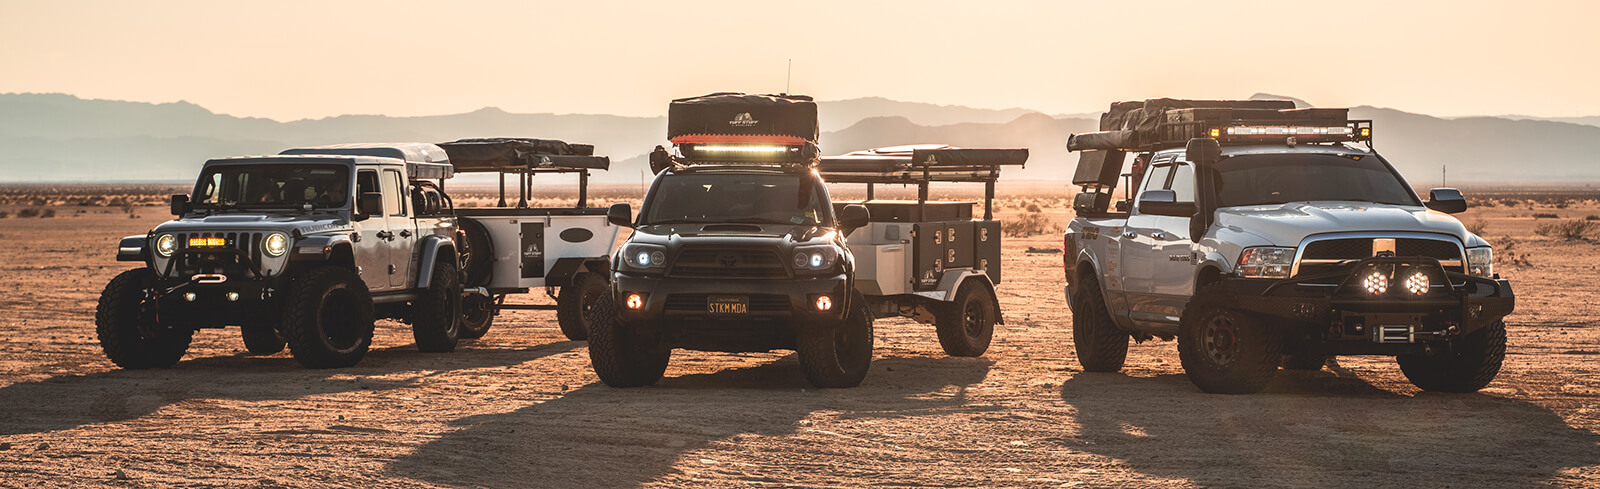 Three Tribe Overland Trailers in the desert